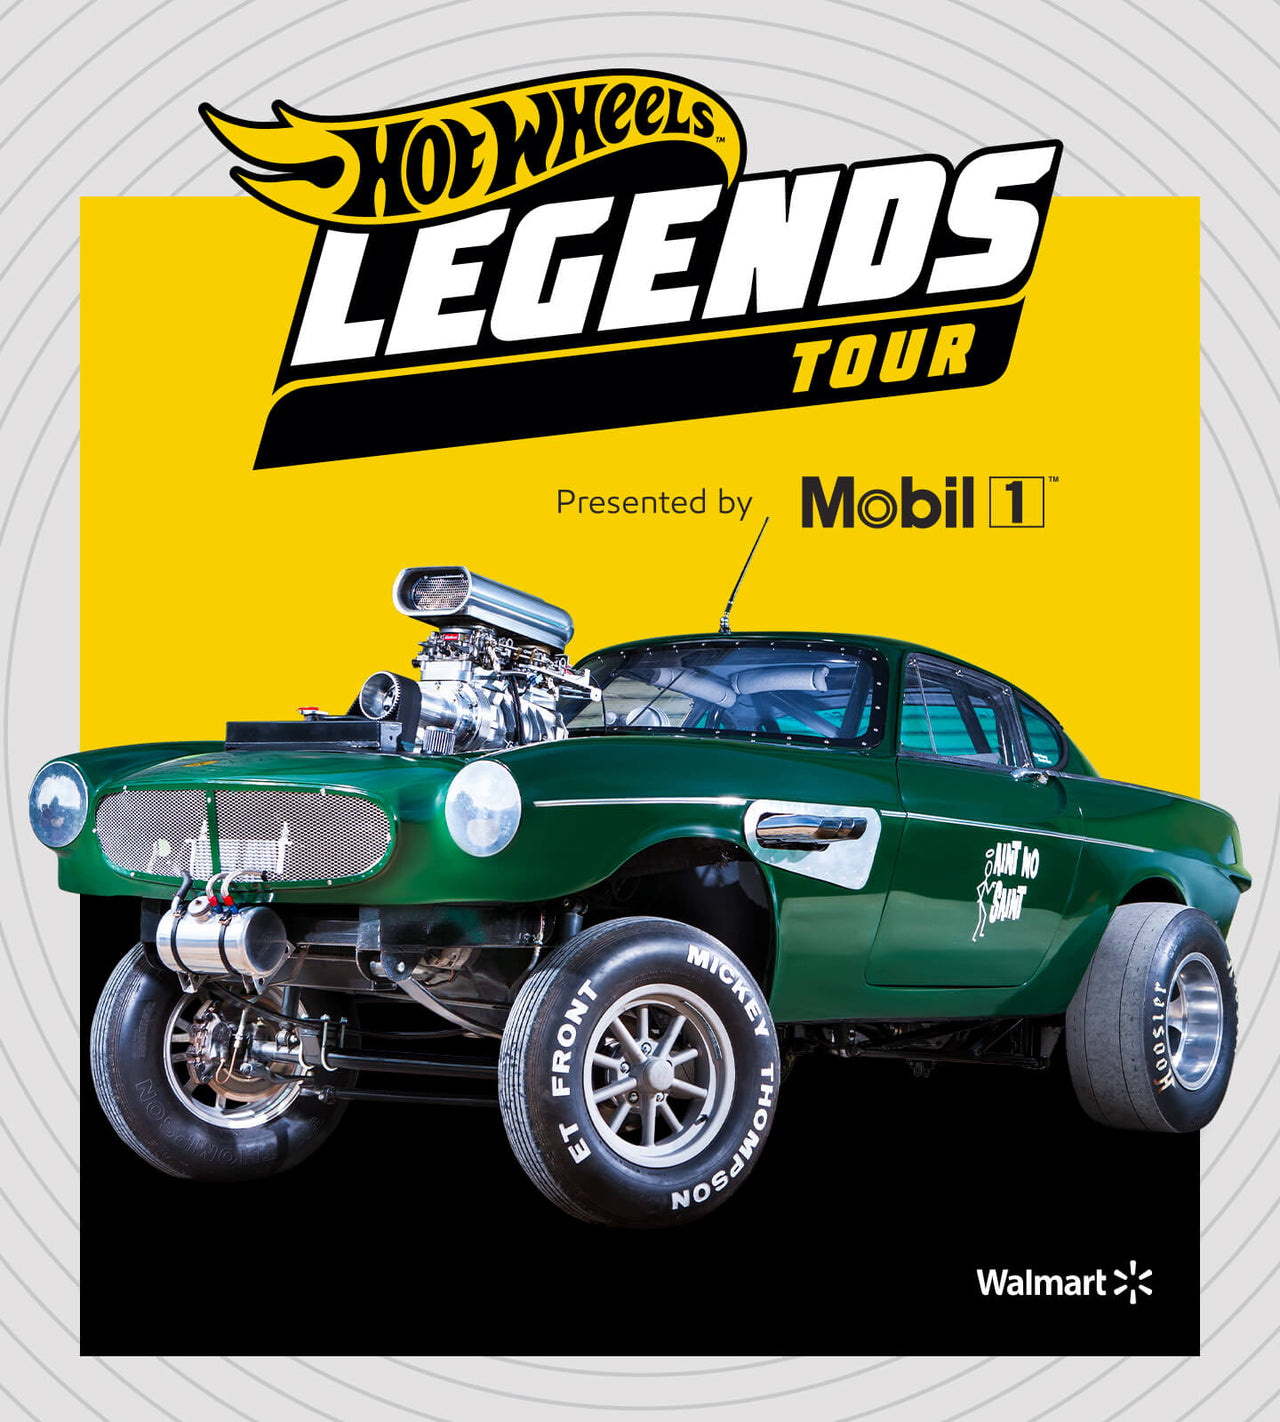 Vert Wheeler goes to Miami Hot Wheels Legends Tour 2023  Vert Wheeler is  headed to Miami for May 13th at Hot Wheels Legends Tour 2023! Be there and  be squared!